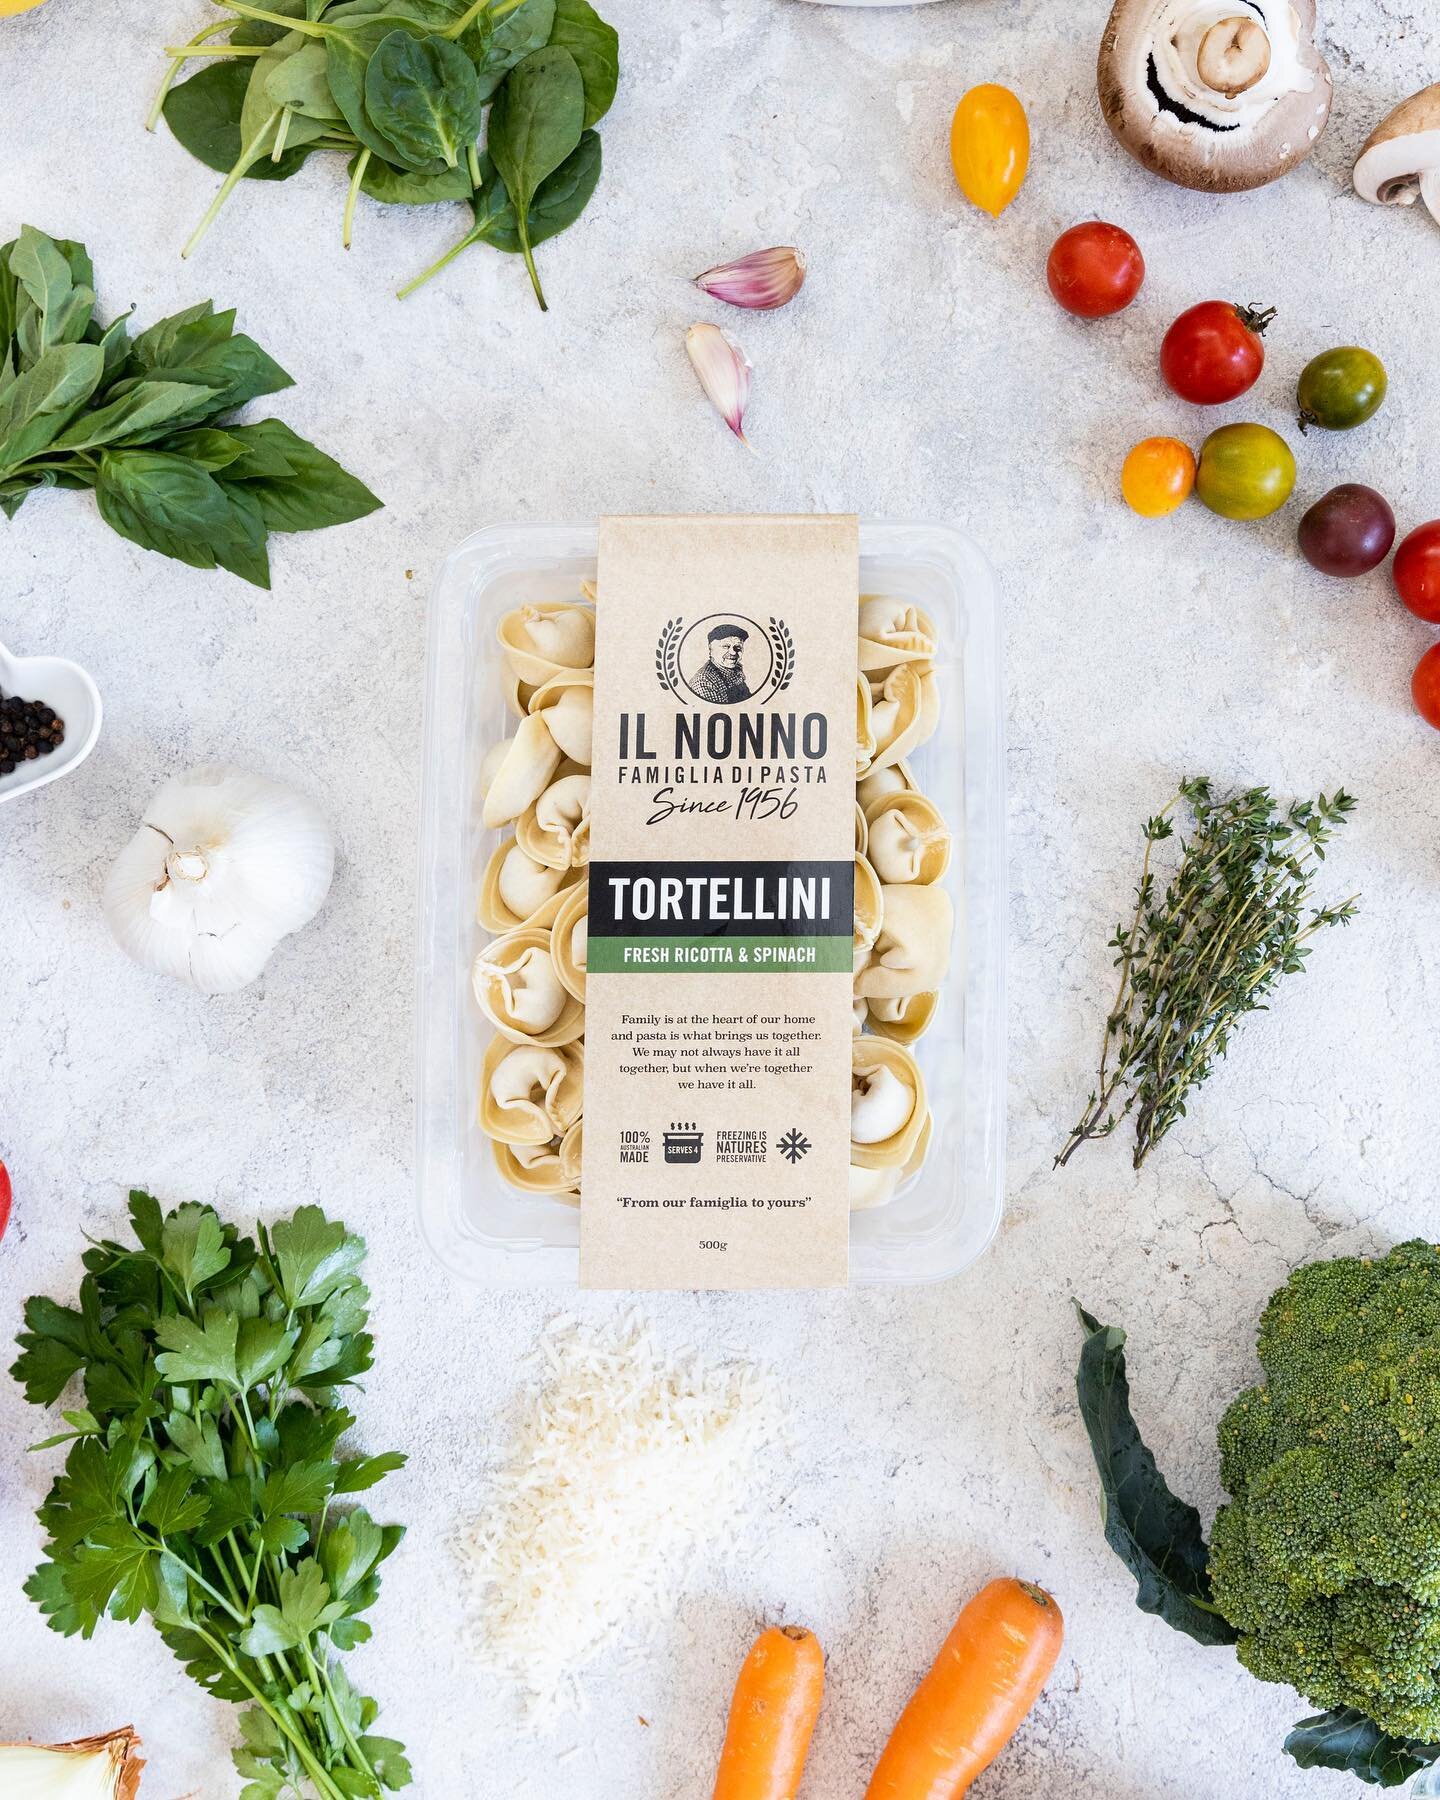 Our Tortellini Fresh Ricotta &amp; Spinach a classic&hellip;.but a favourite! Made with real ingredients and is a perfect mid week dinner for everyone! Straight from freezer to boiling water &amp; ready in 7 minutes. Buon appetito!!
.
.
.
#ilnonno #i